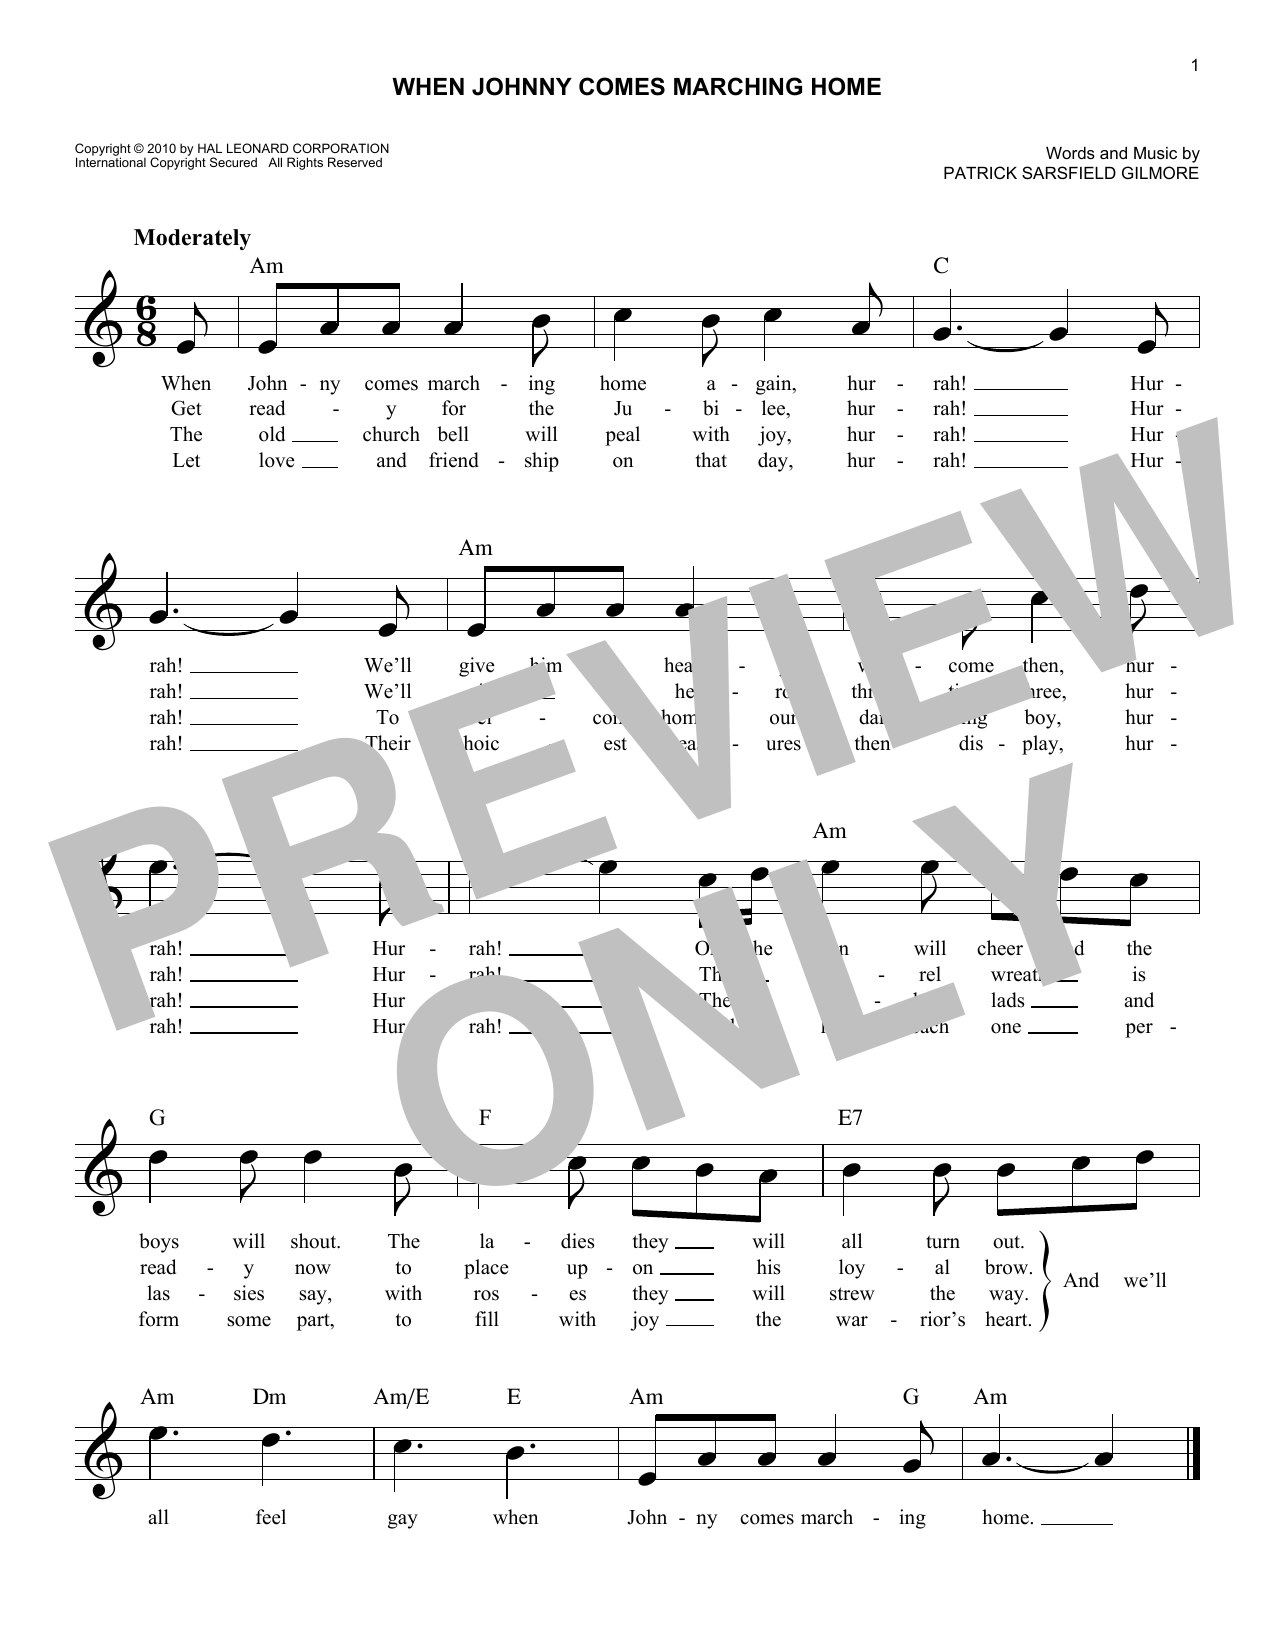 Download Patrick Sarsfield Gilmore When Johnny Comes Marching Home Sheet Music